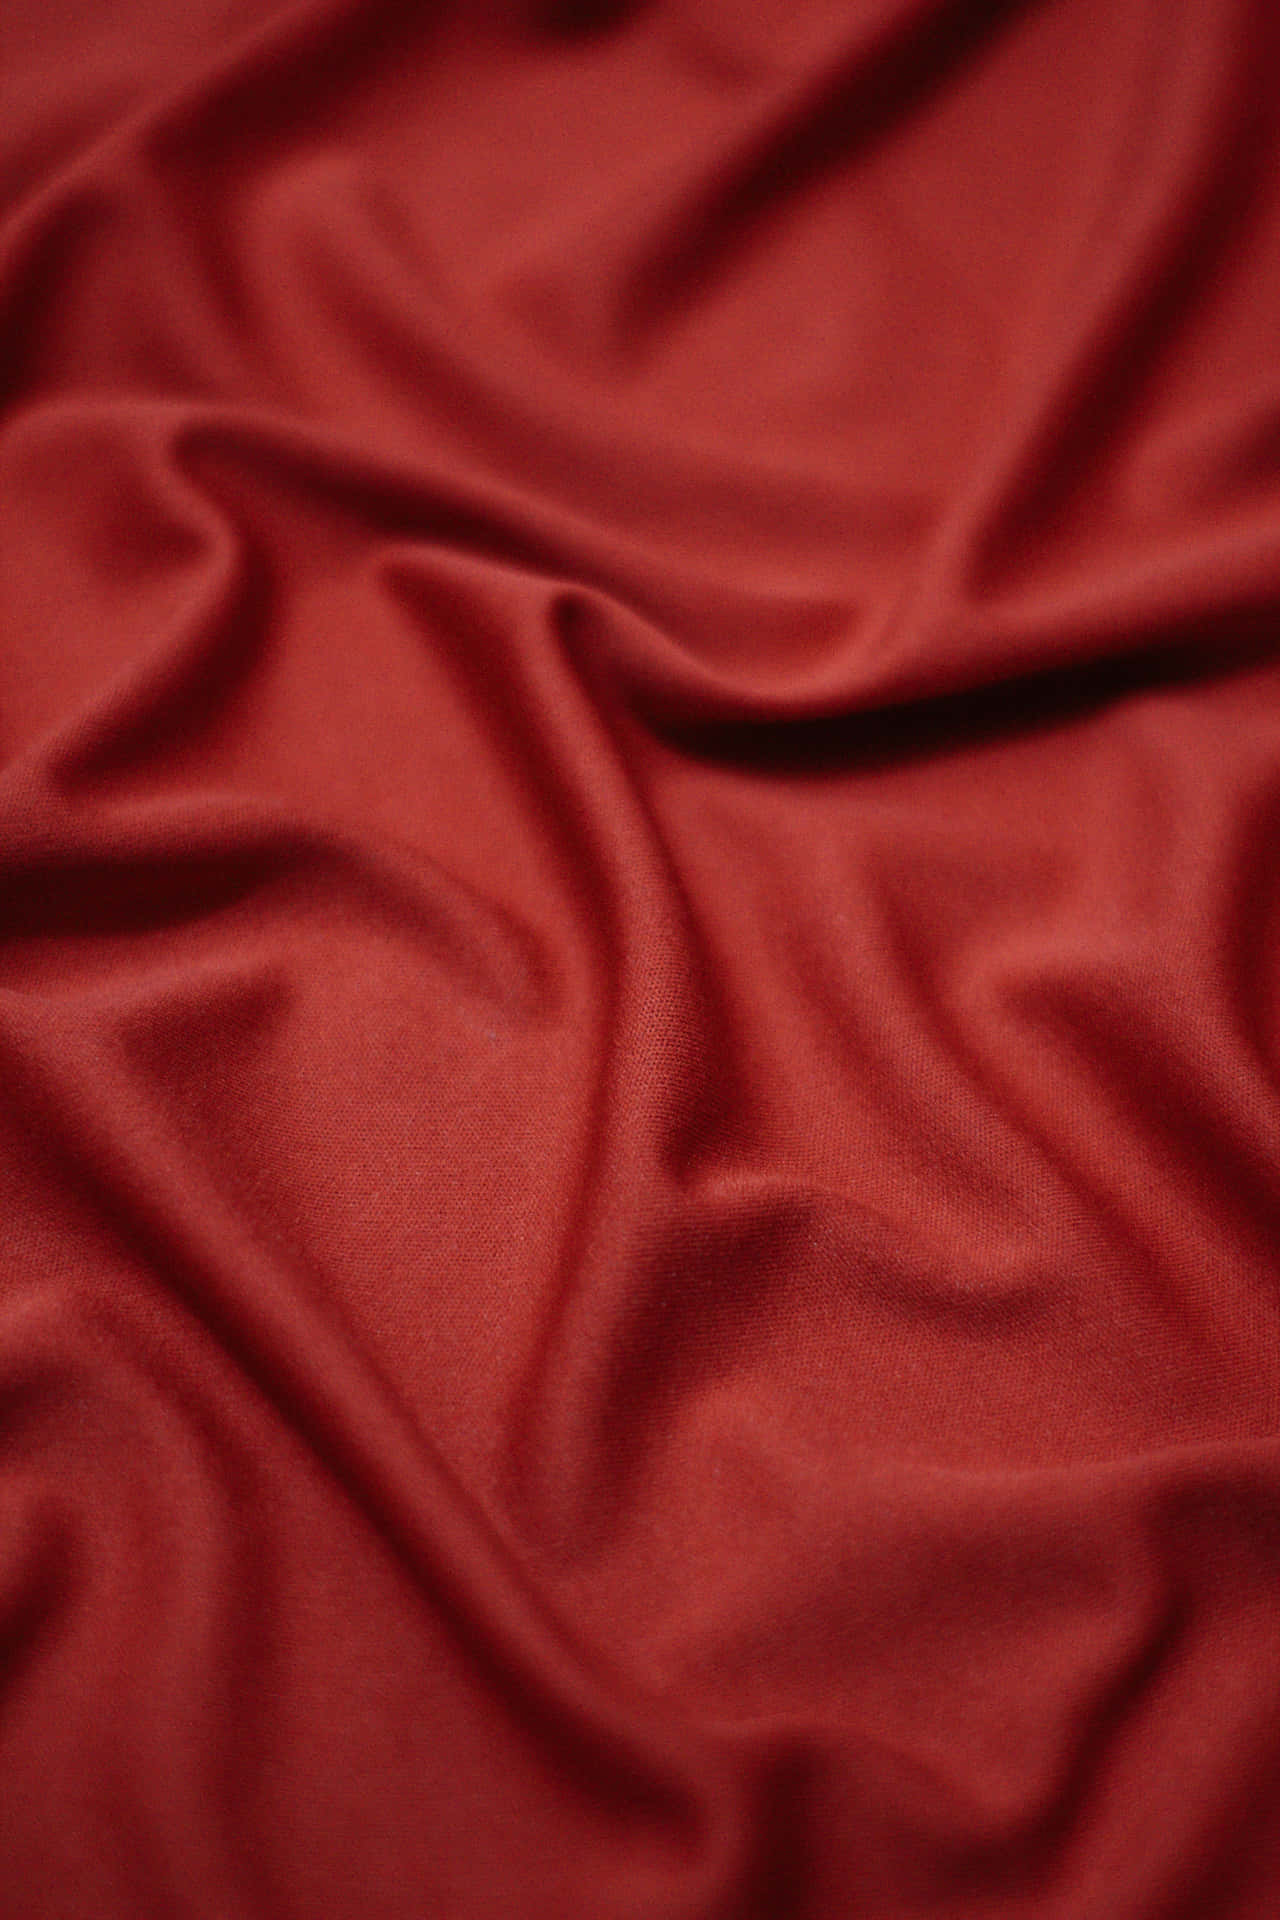 Soft and Textured Fabric Background